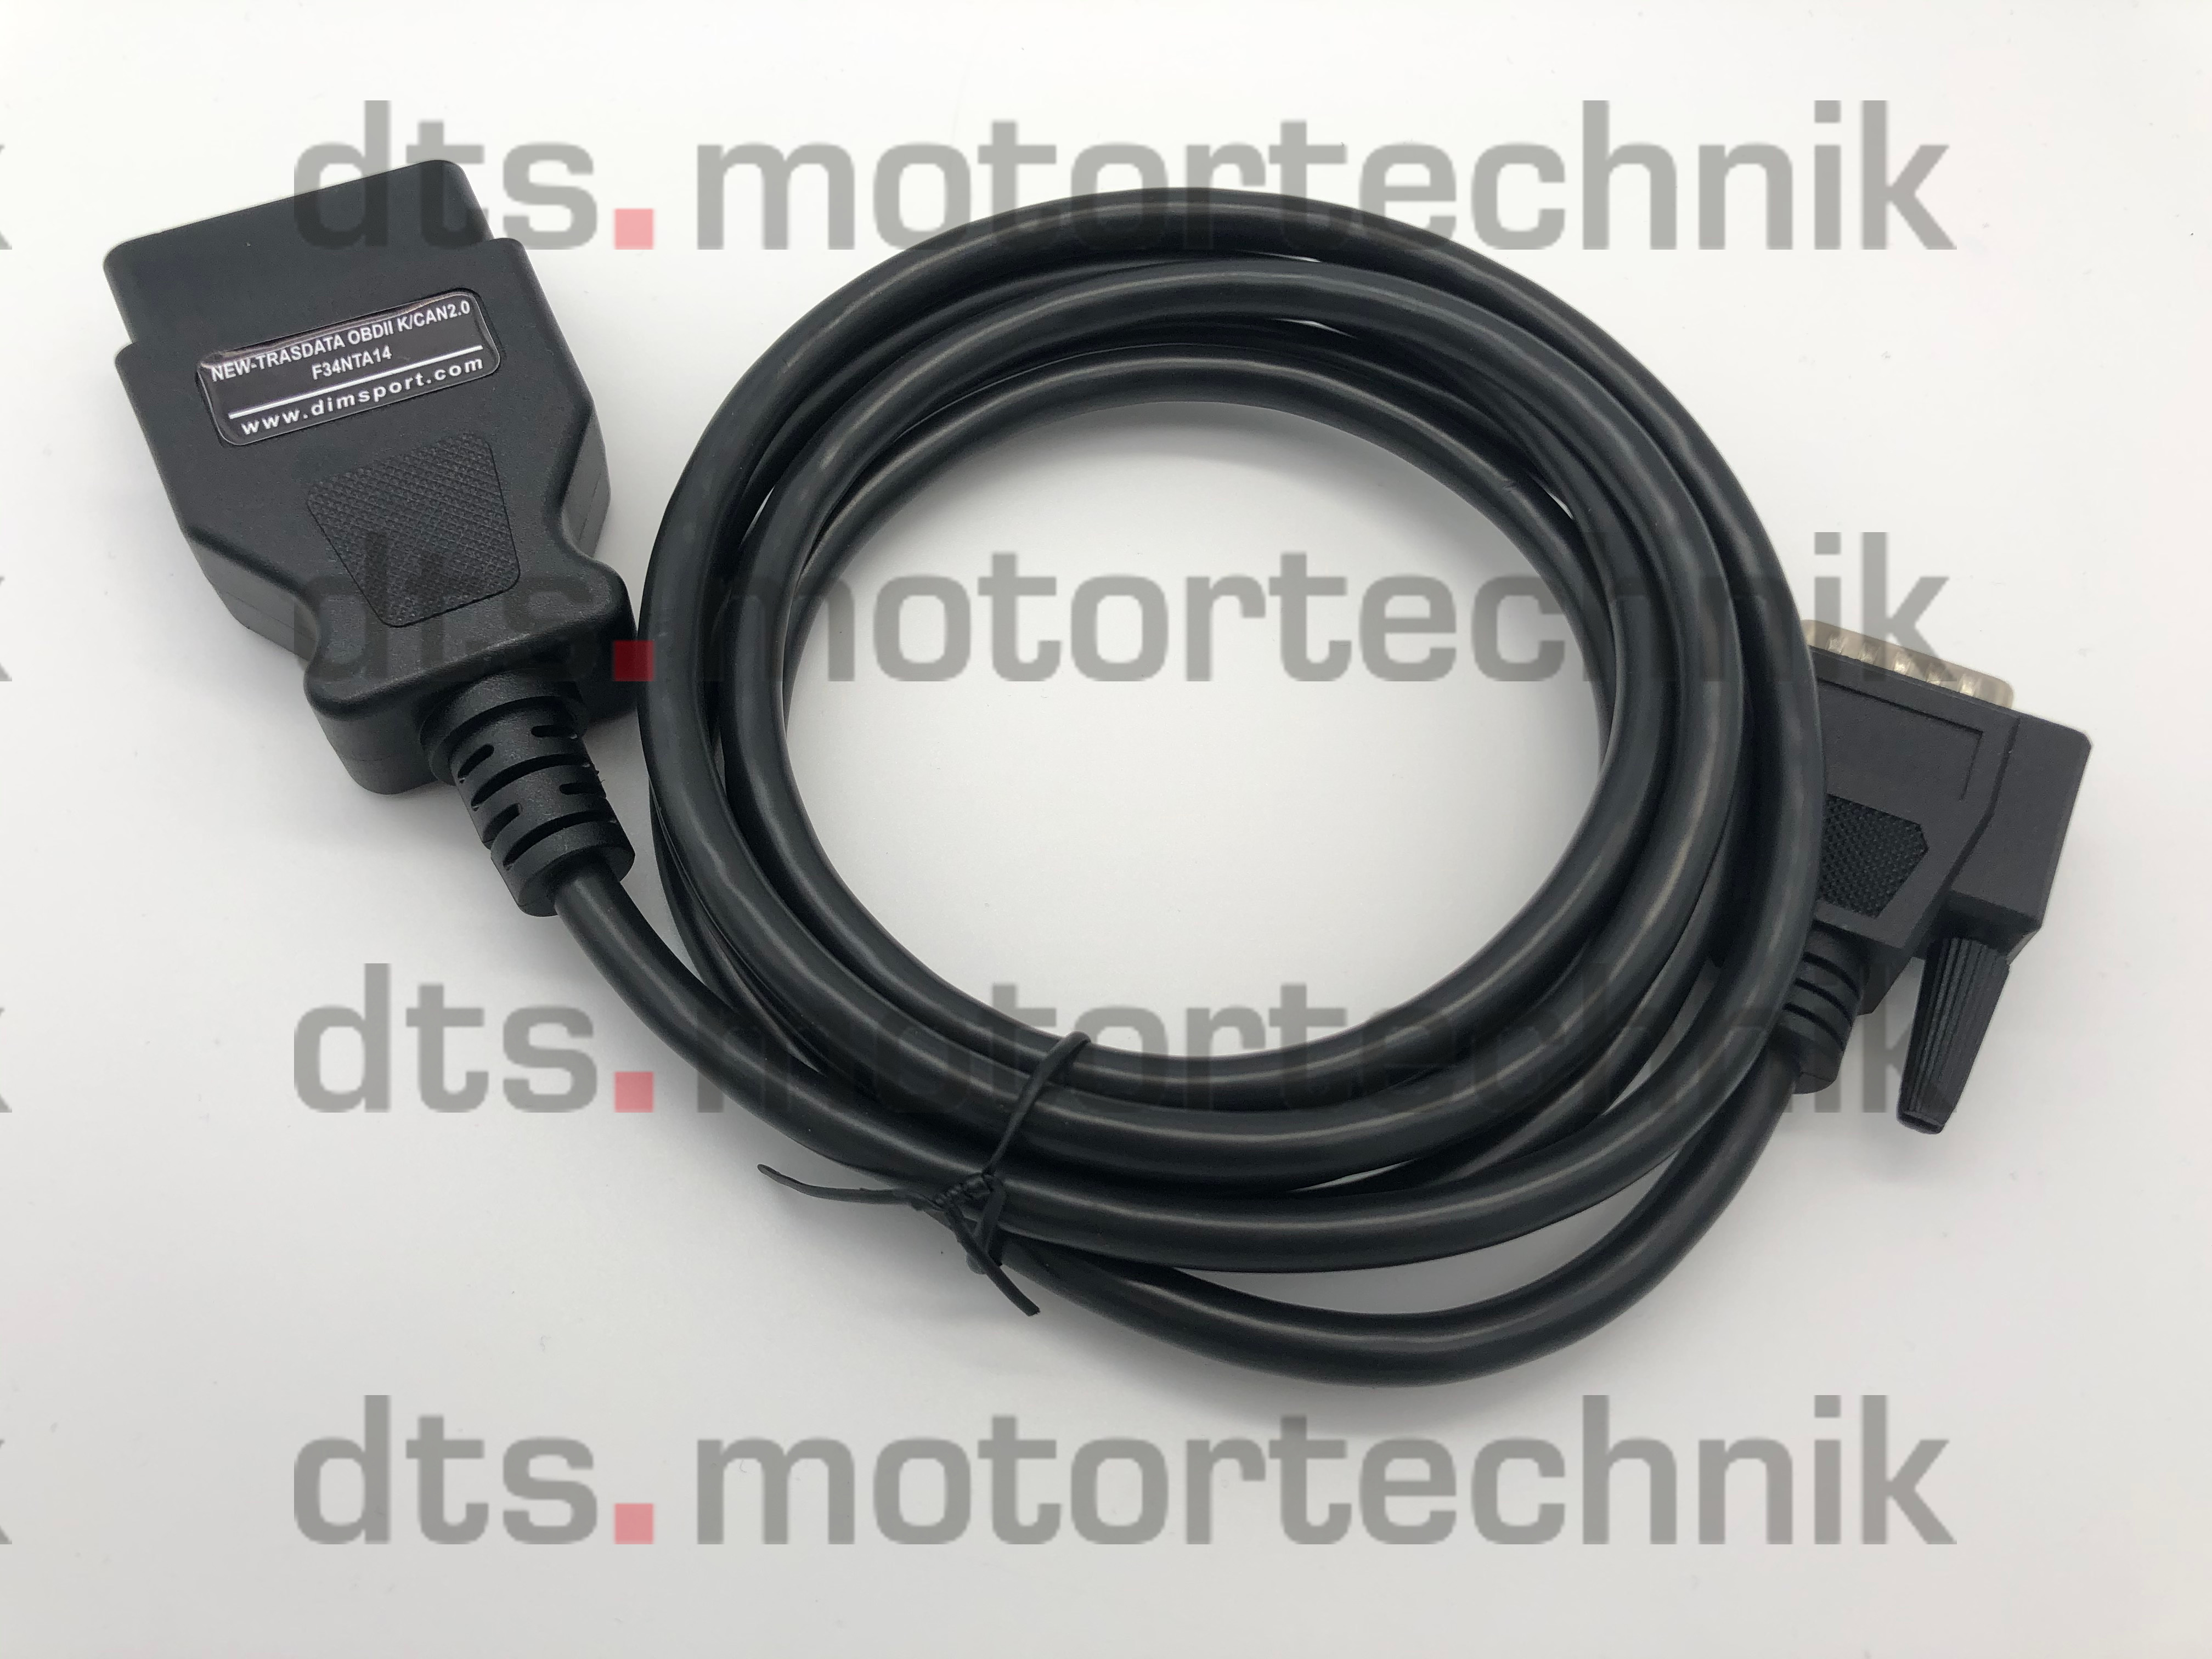 OBDII K/CAN2.0 connector for New Trasdata